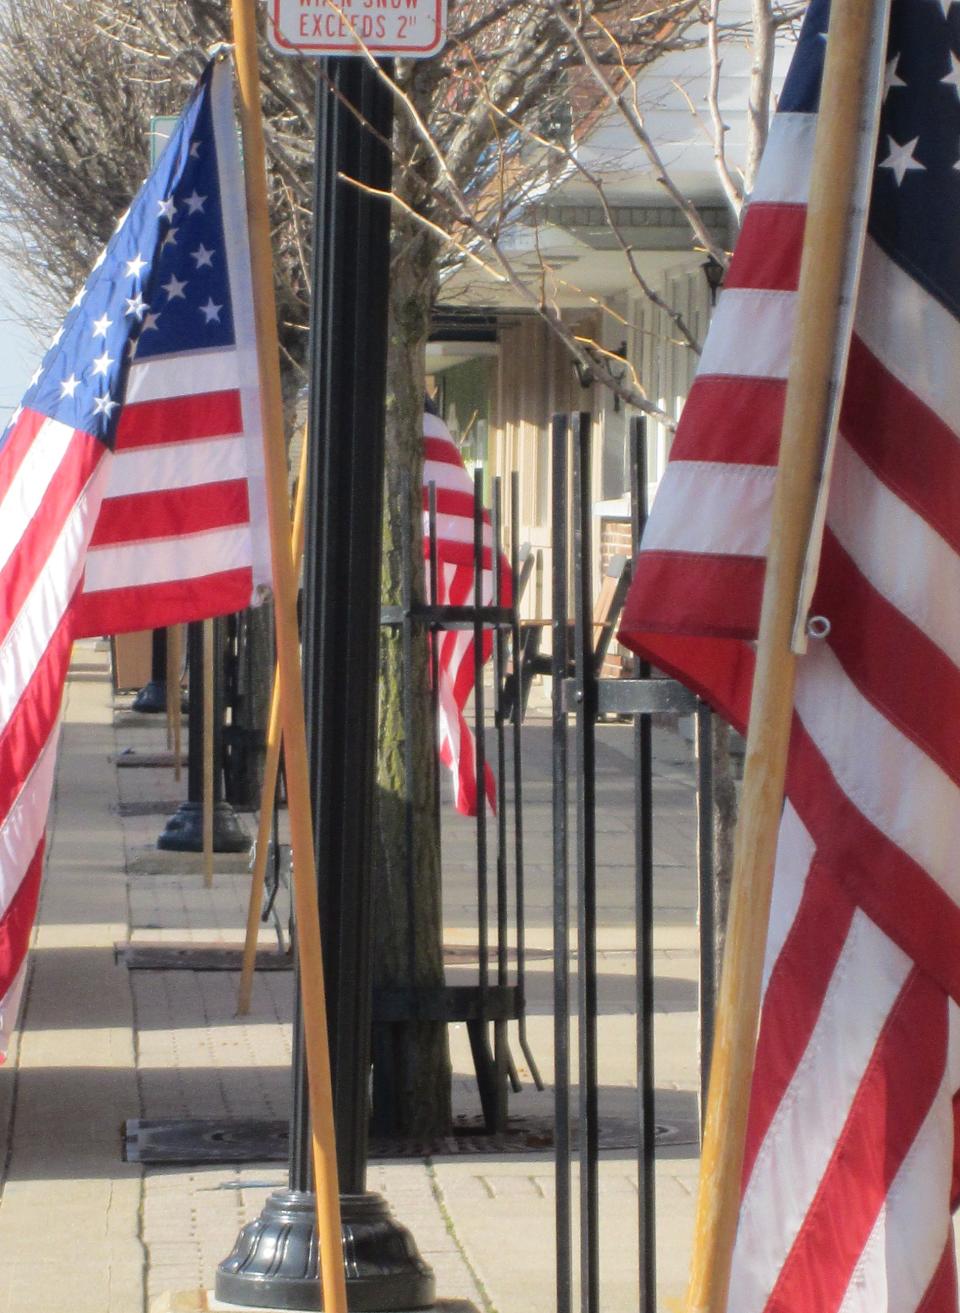 Clyde Career Women members put out dozens of American flags throughout their city for each national holiday and special events.